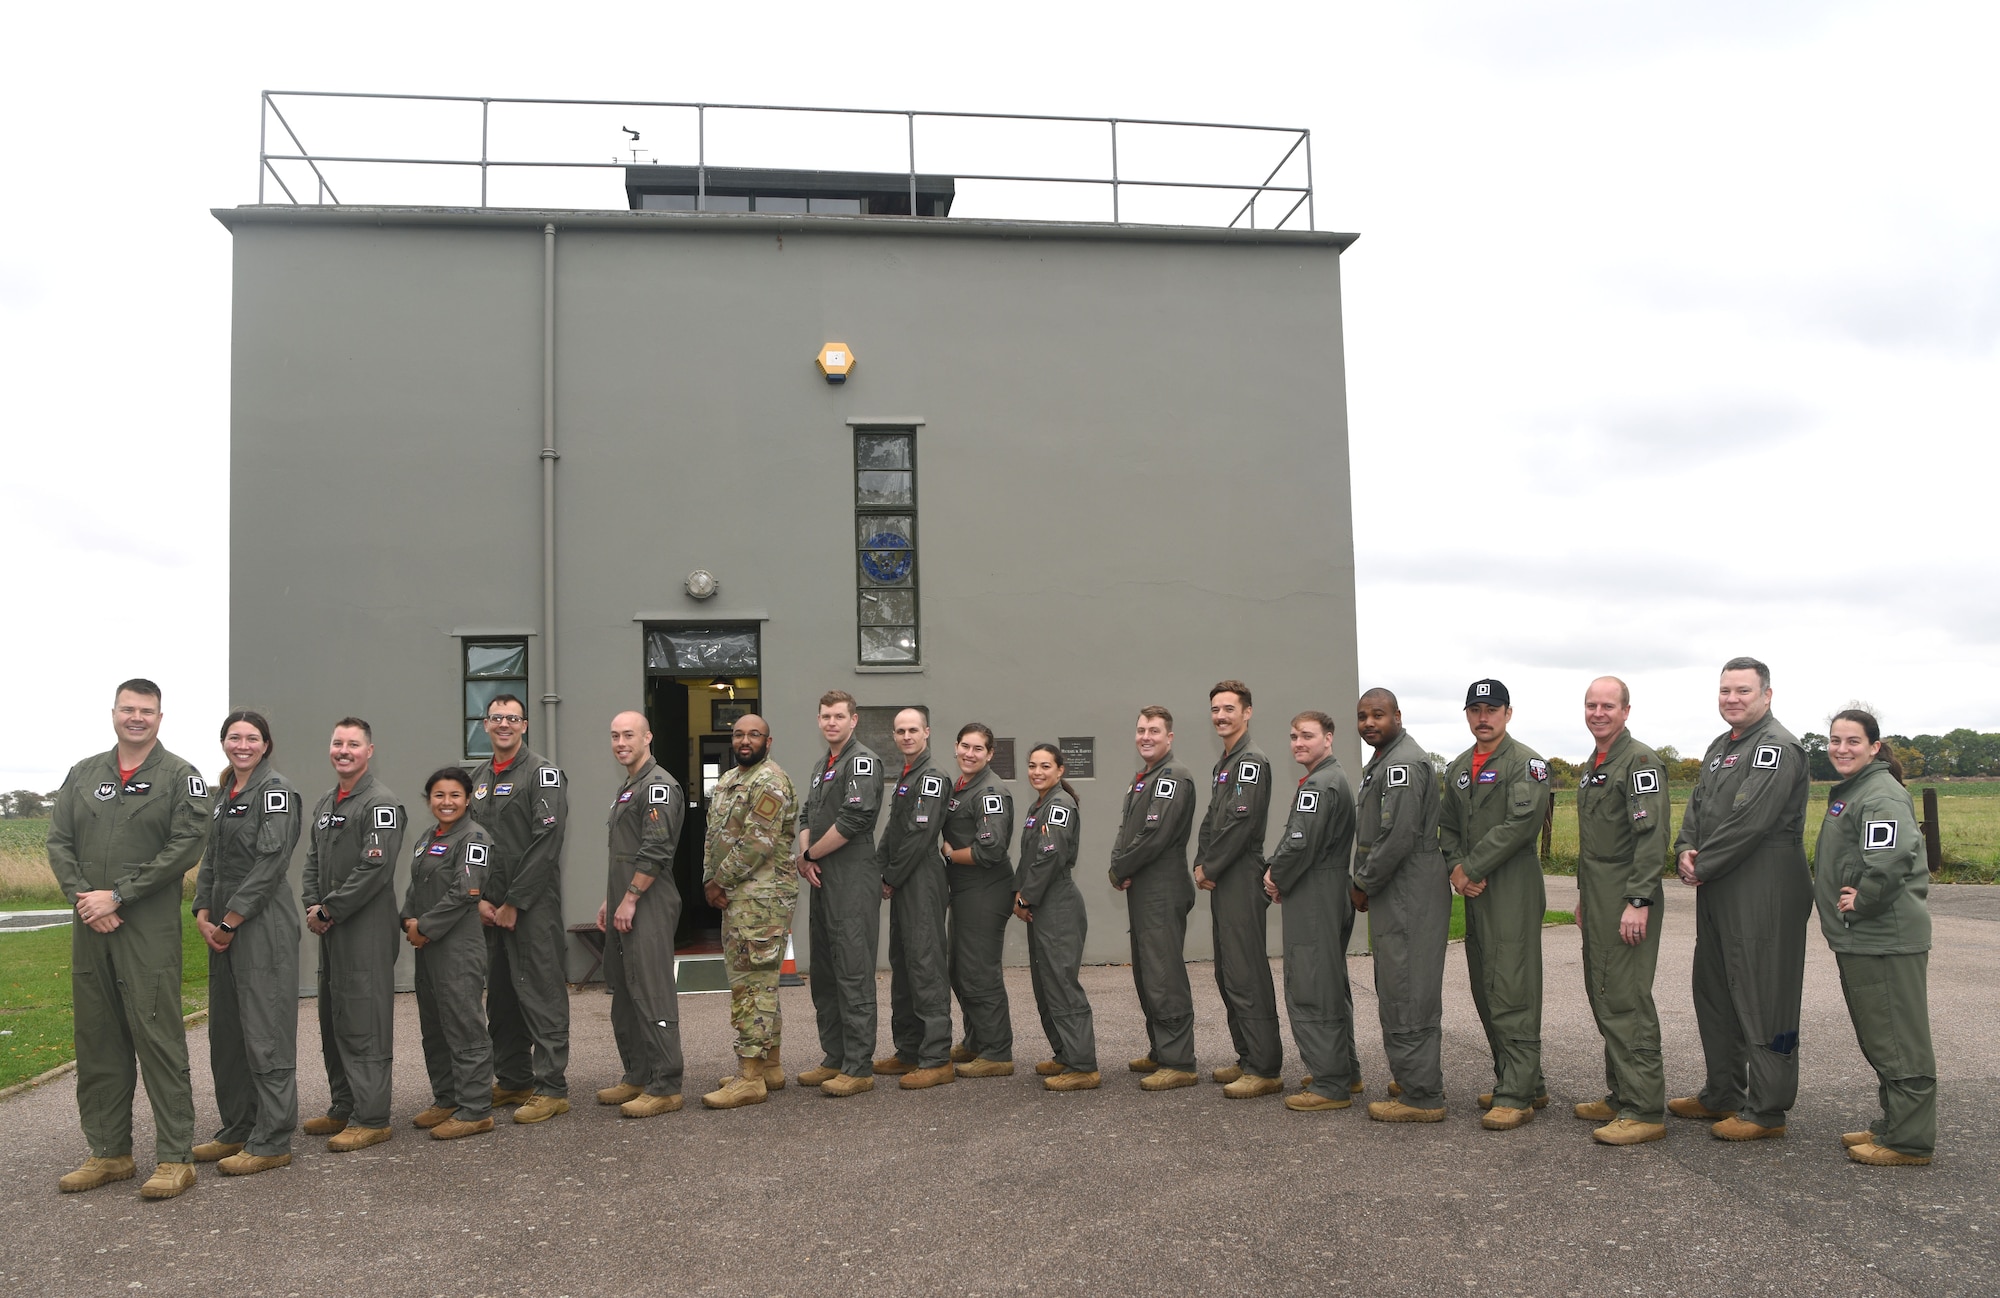 U.S. Air Force pilots and boom operators from the 351st Air Refueling Squadron proudly show off their Square D patches at the 100th Bomb Group Memorial Museum at Thorpe Abbotts, England, Oct. 14, 2022. Thorpe Abbotts was home to the original 351st Bomb Squadron and 100th Bomb Group during World War II. The buzzard patch is the heritage patch and only those who have completed MCT can wear the patch on Fridays. (U.S. Air Force photo by Karen Abeyasekere)